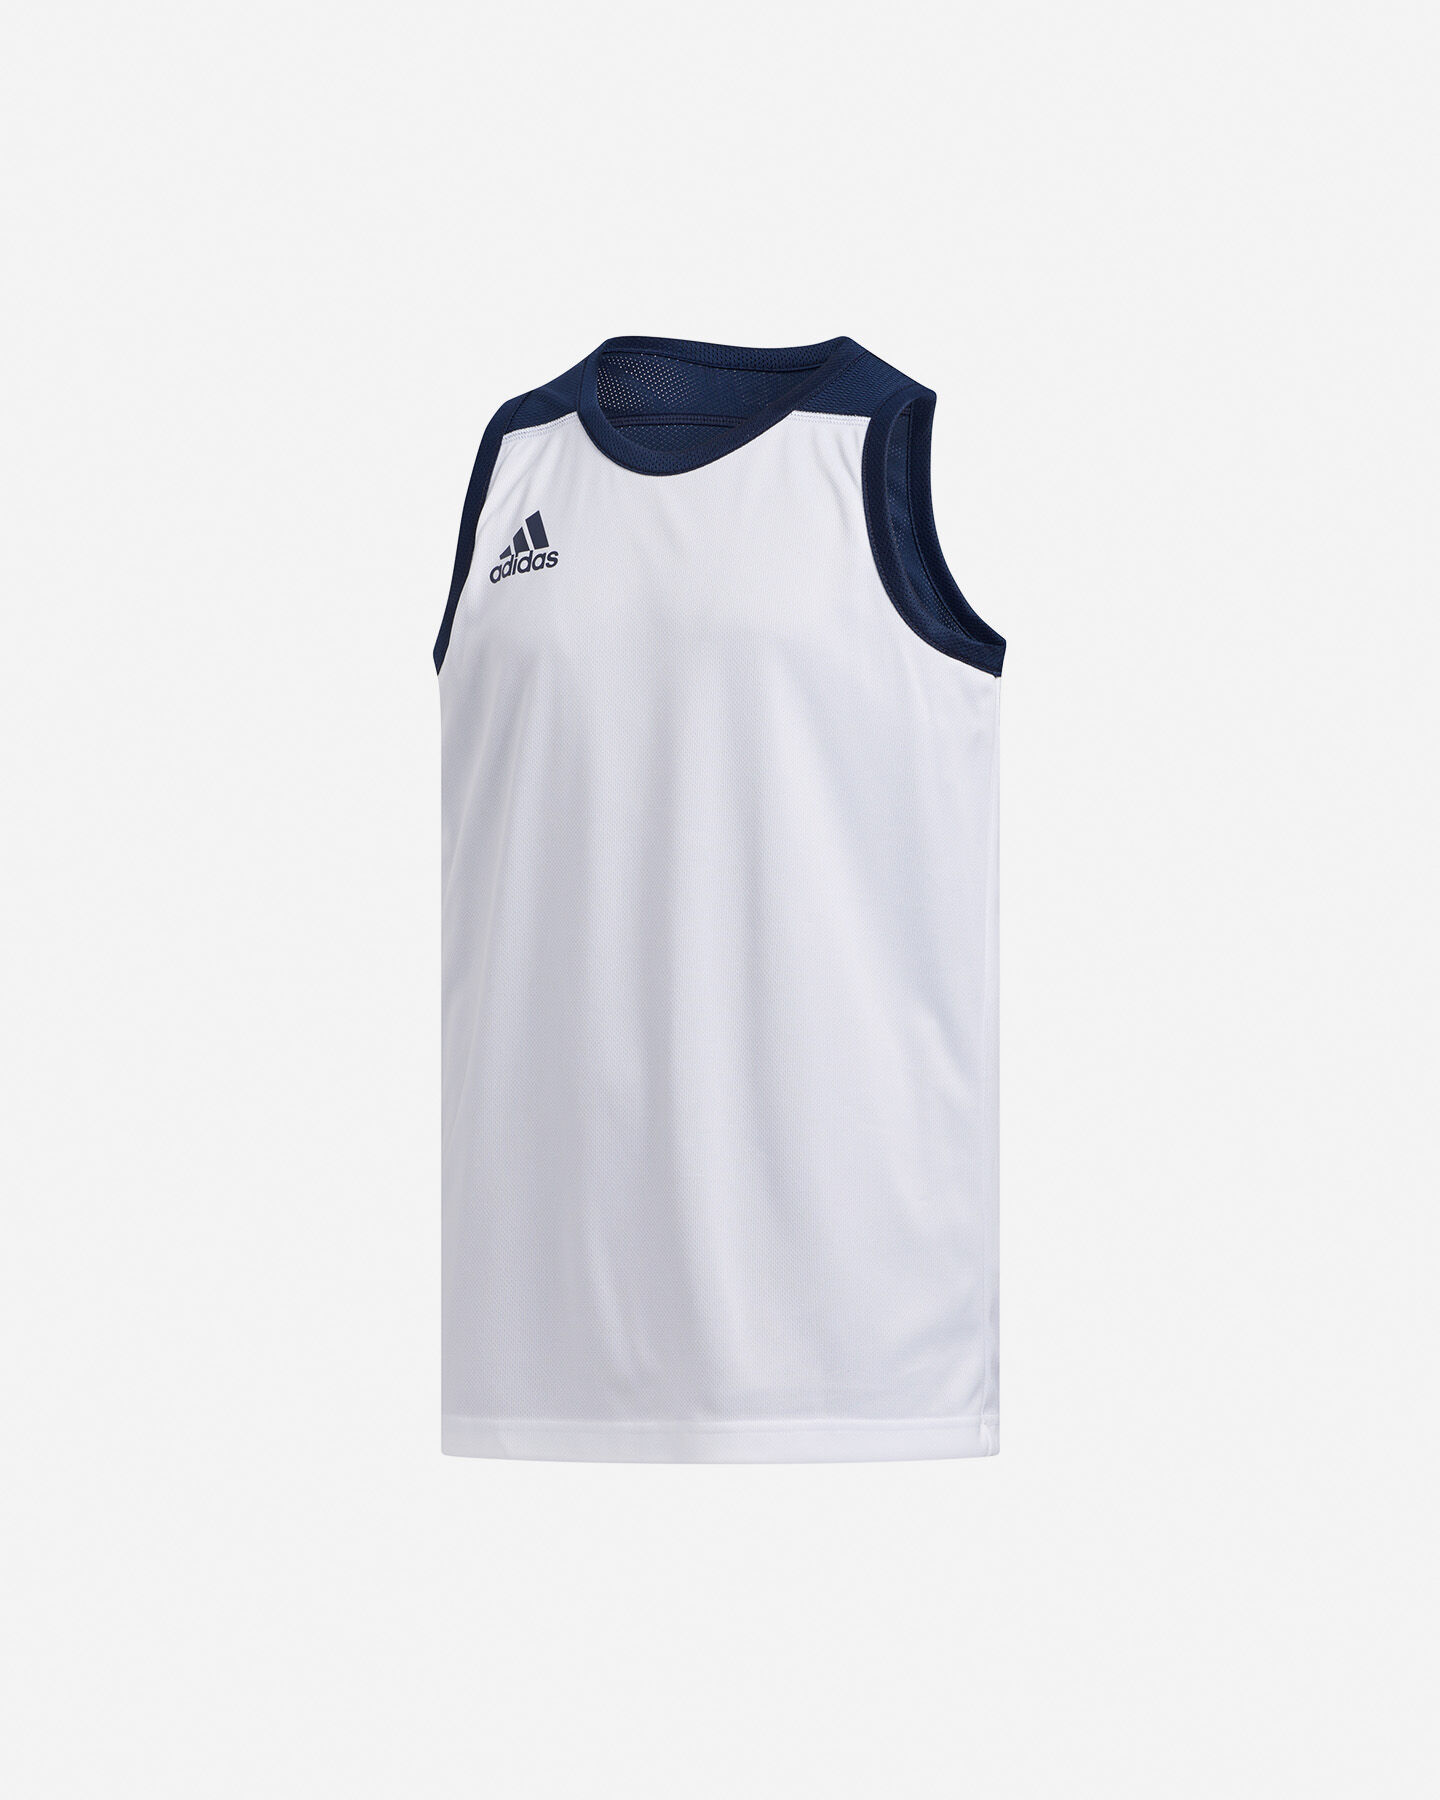  Maglia basket ADIDAS 3G SPEED REVERSIBLE S5066419|UNI|7-8A scatto 2